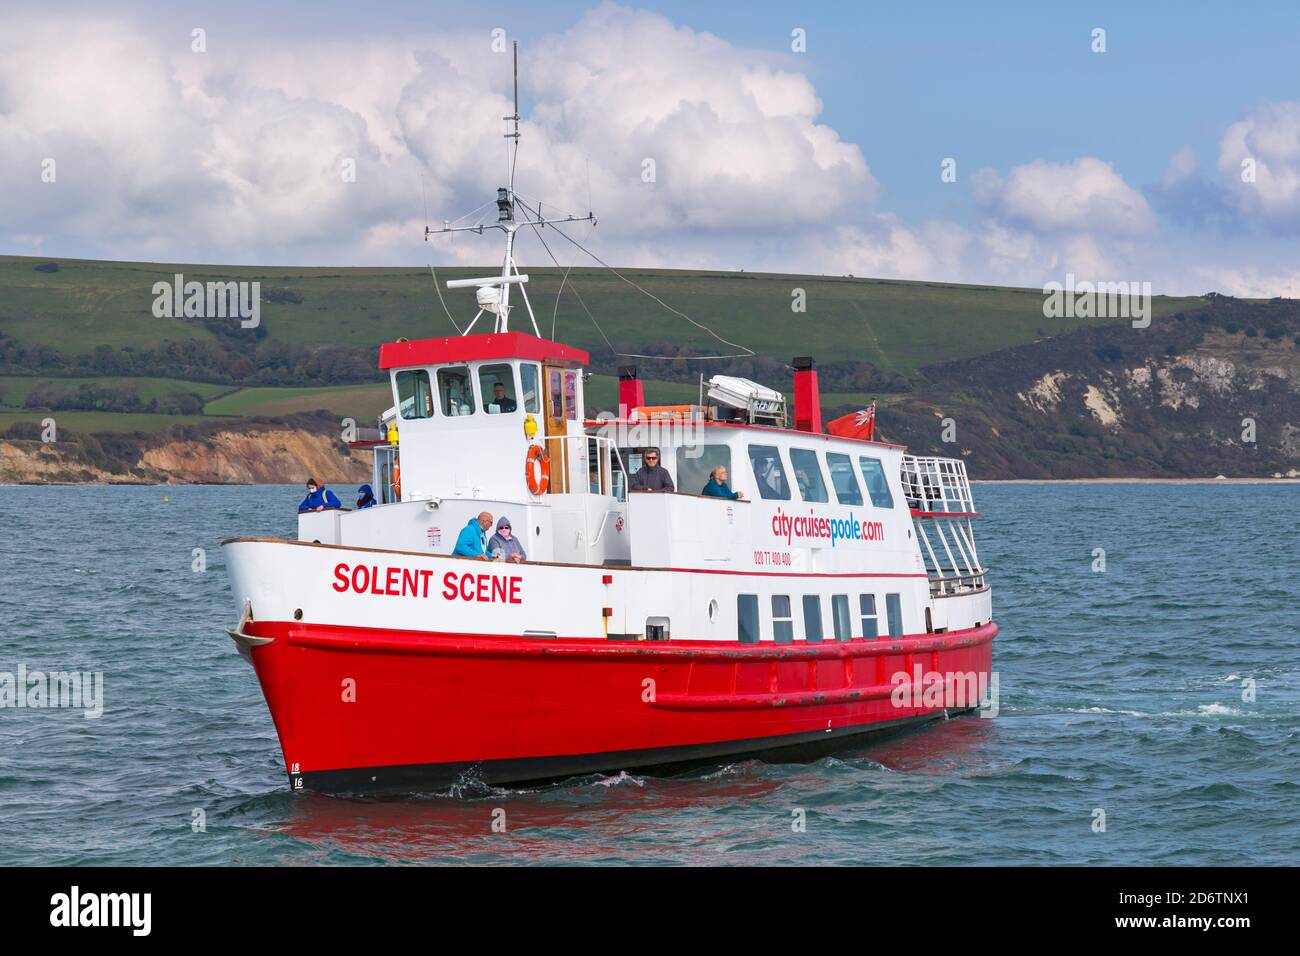 Passengers enjoy a trip along the coastline and around the bay on the Solent Scene boat arriving in Swanage, Dorset UK in October Stock Photo